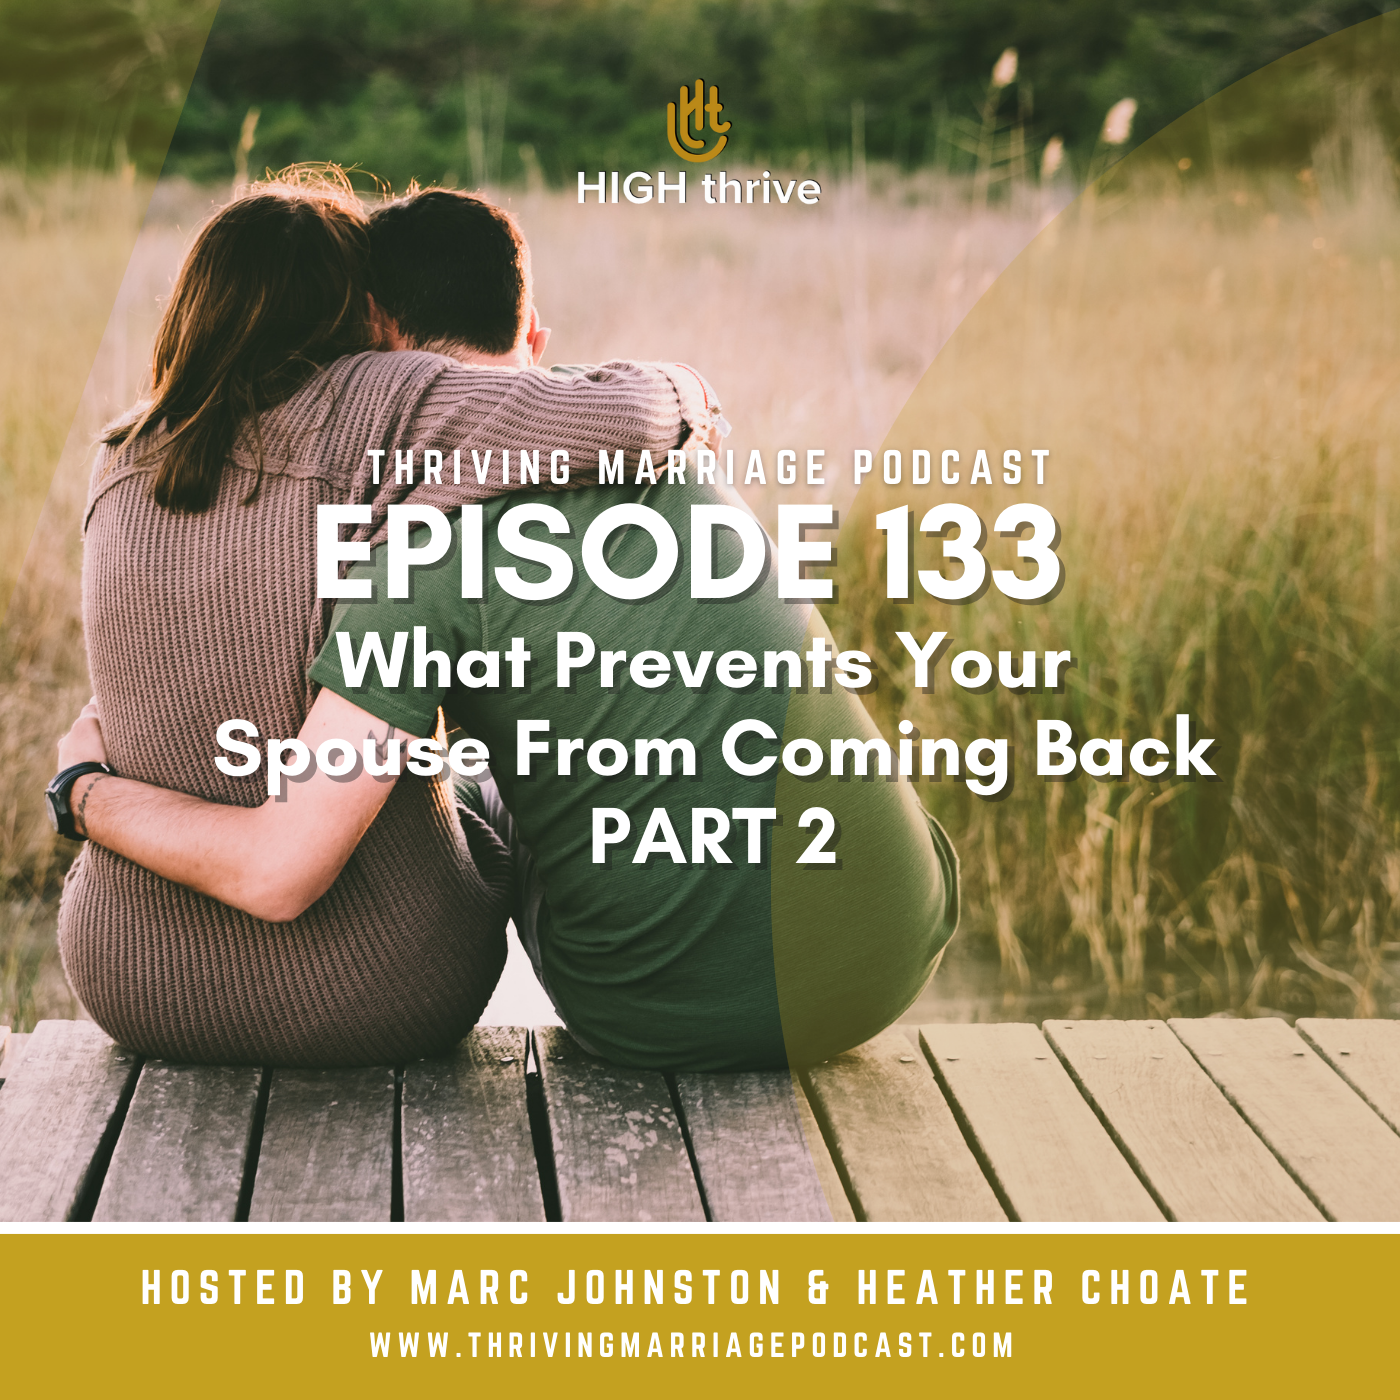 Episode 133: What Prevents Your Spouse From Coming Back [PART 2]